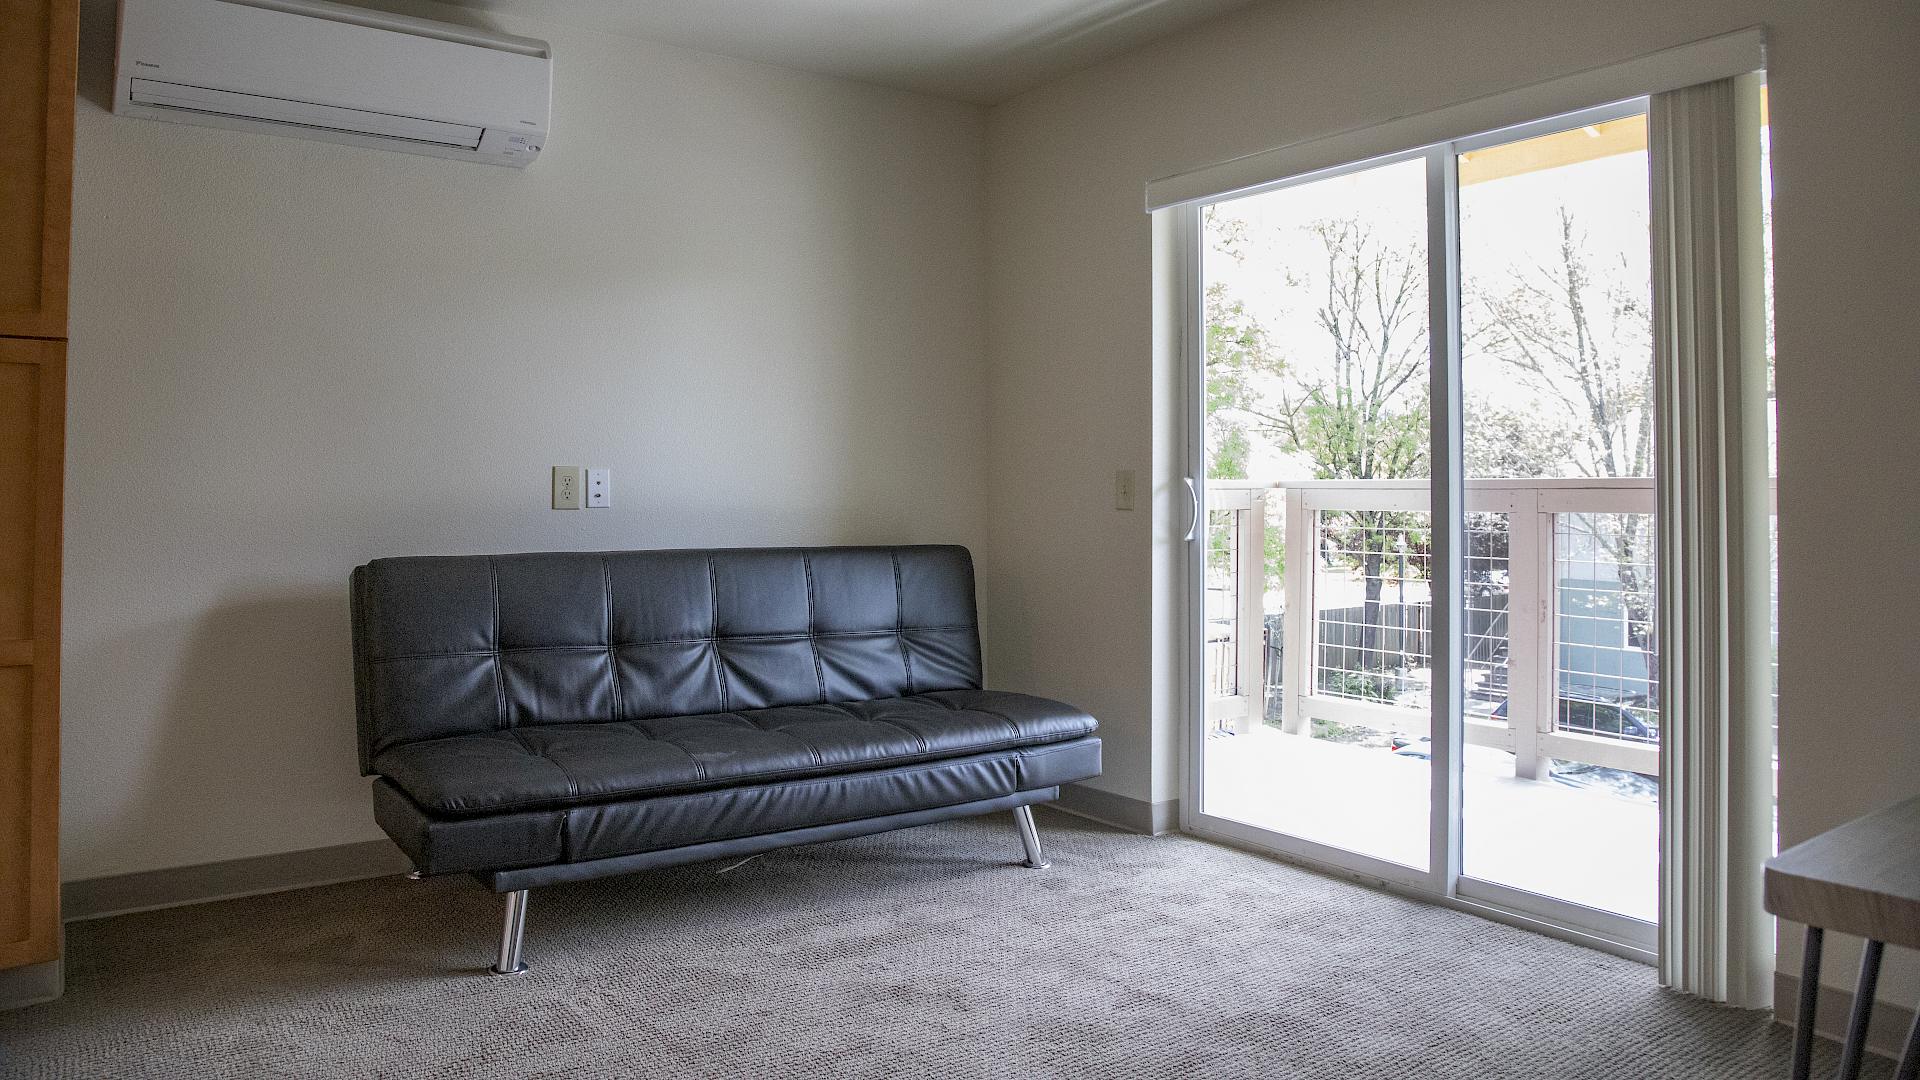 One of the furnished living rooms in our 1 bedroom unit. slide image